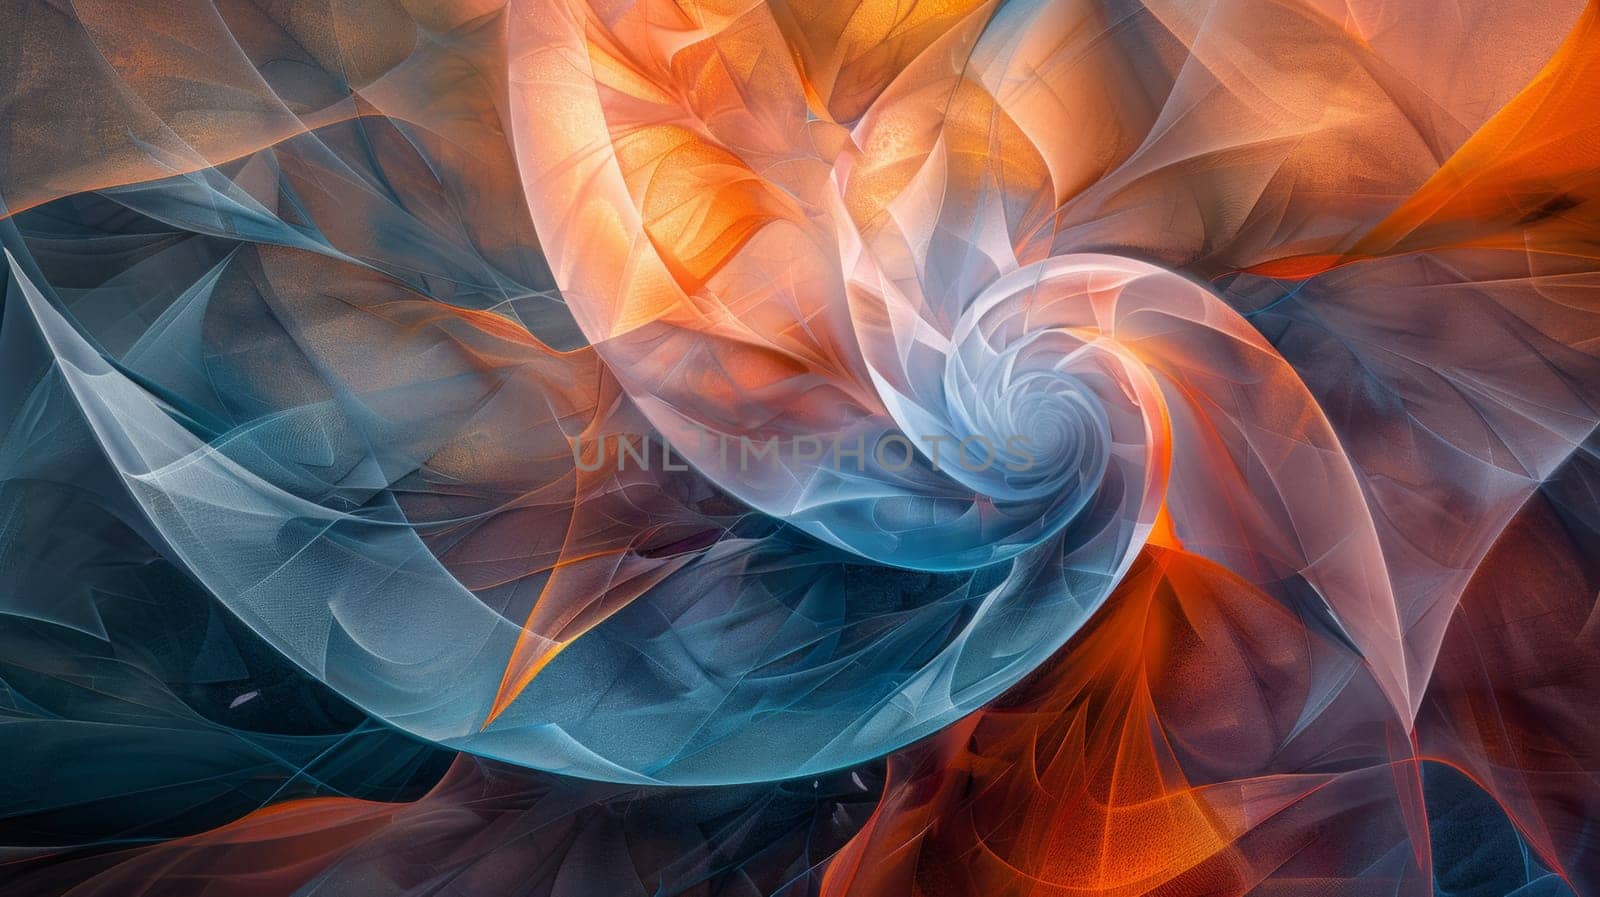 A digital art of a swirl design with orange, blue and white, AI by starush